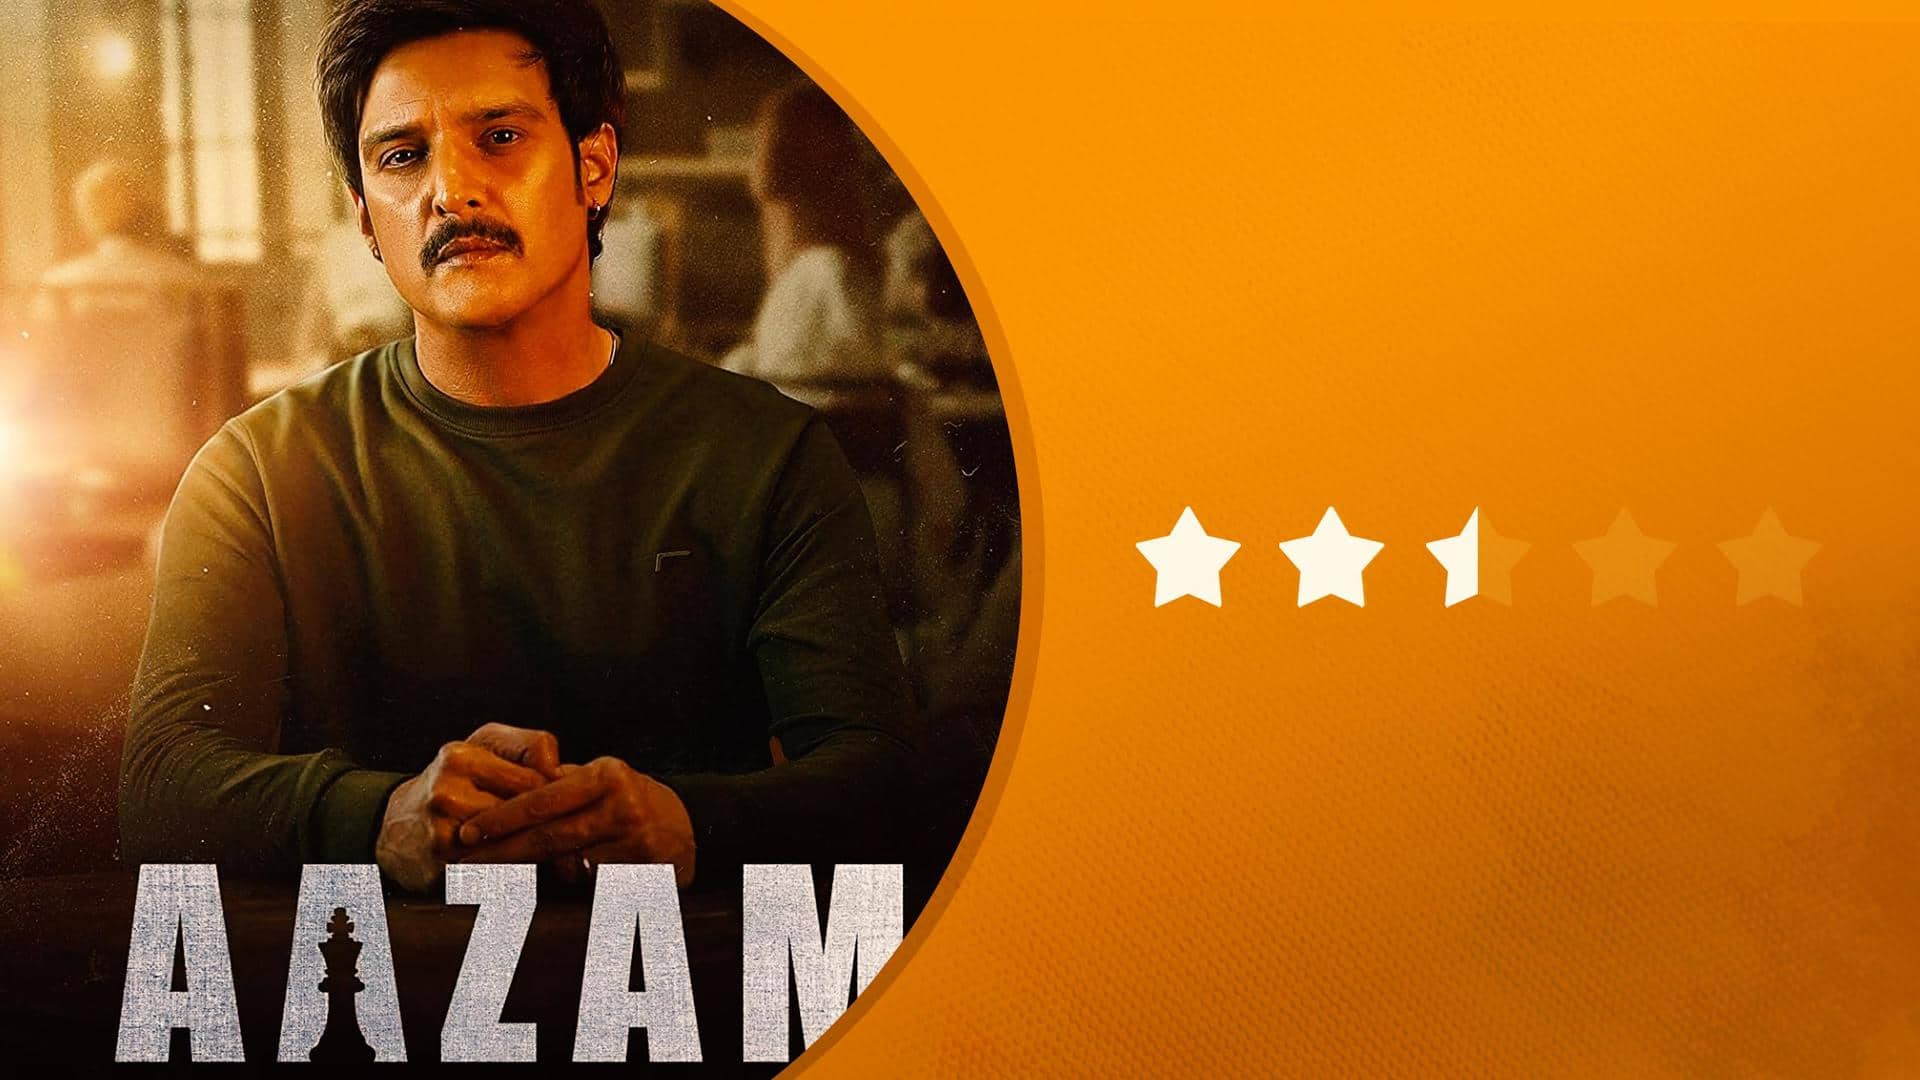 'Aazam' review: Writing is star of engaging, yet inconsistent thriller